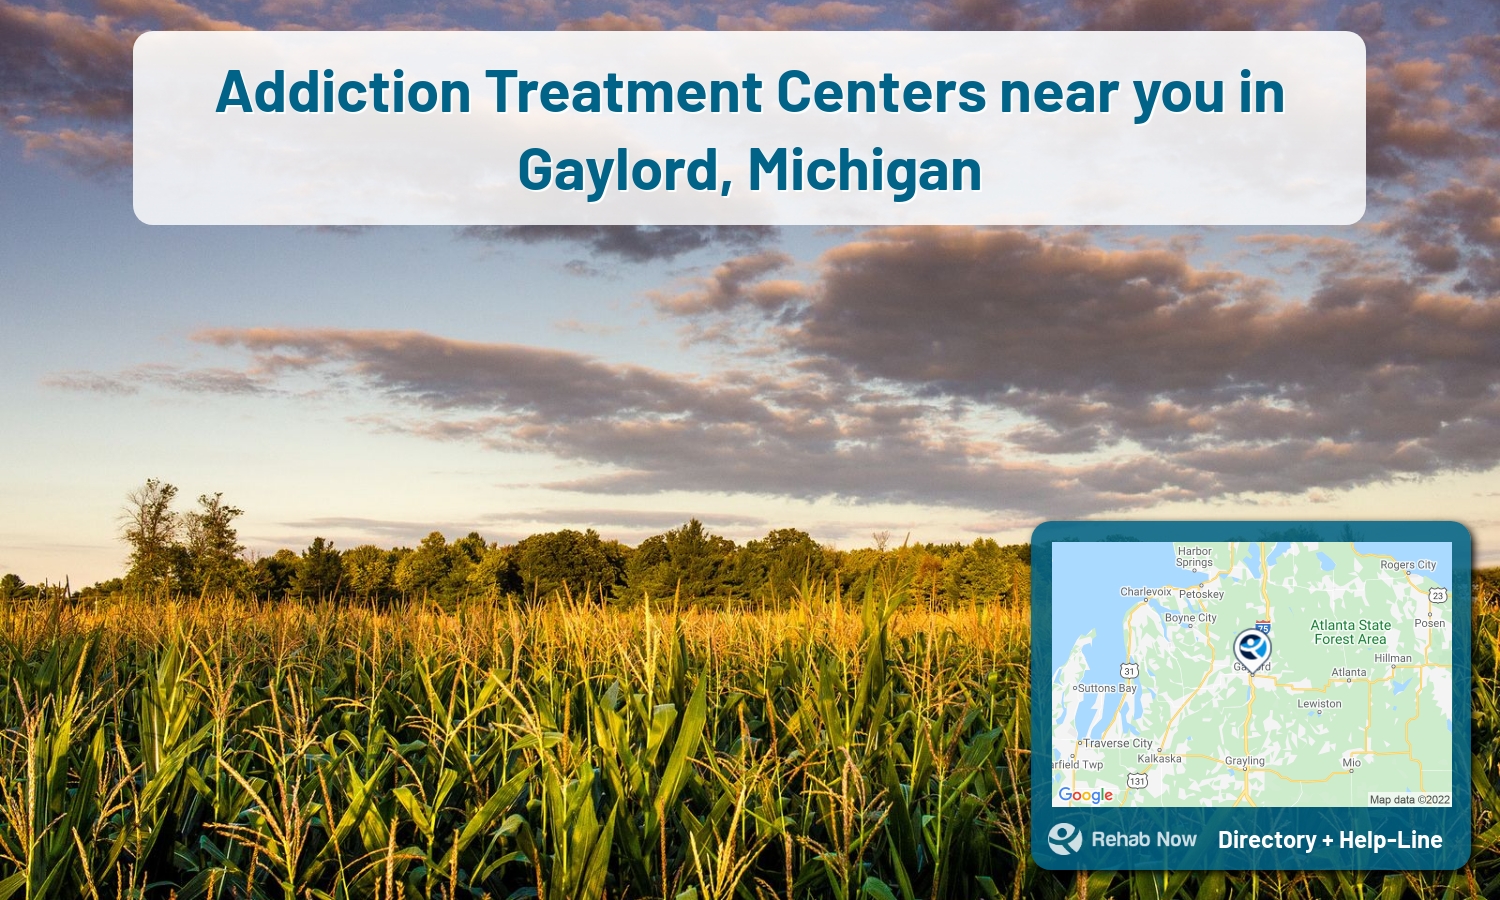 Ready to pick a rehab center in Gaylord? Get off alcohol, opiates, and other drugs, by selecting top drug rehab centers in Michigan